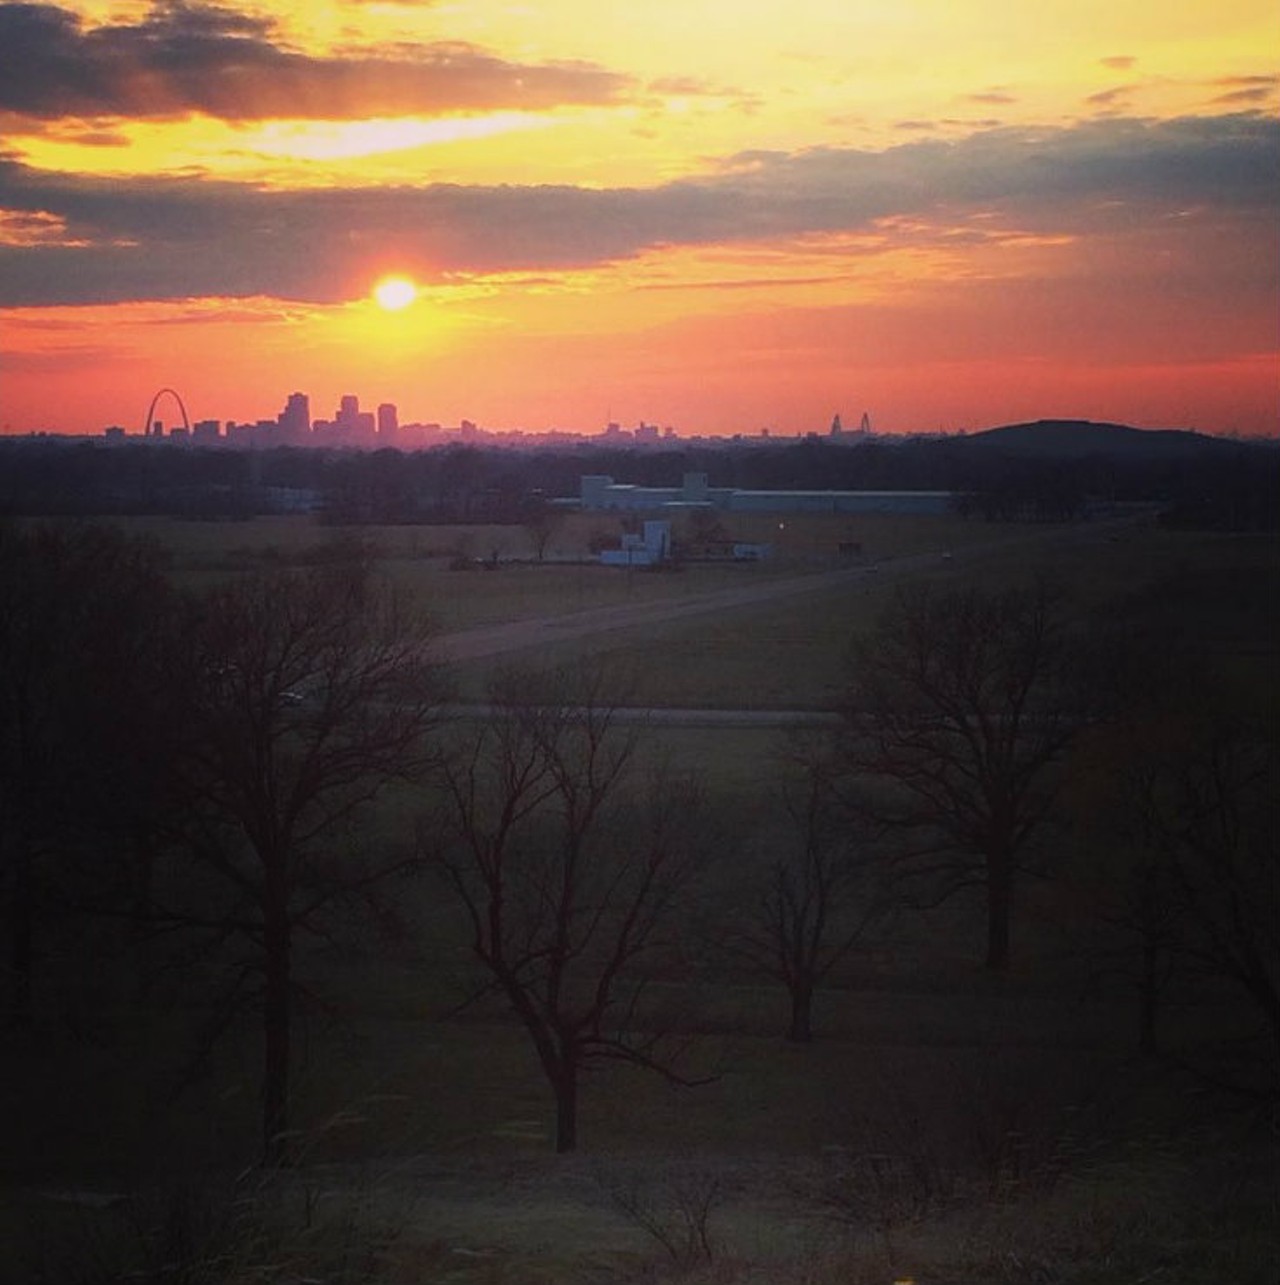 In addition to a history lesson, you'll get an unexpected bonus at Cahokia Mounds -- a neat view of the St. Louis skyline off in the distance. It will make the trip up the stairs of Monks Mound totally worth it. Photo courtesy of Instagram / lizafarr.